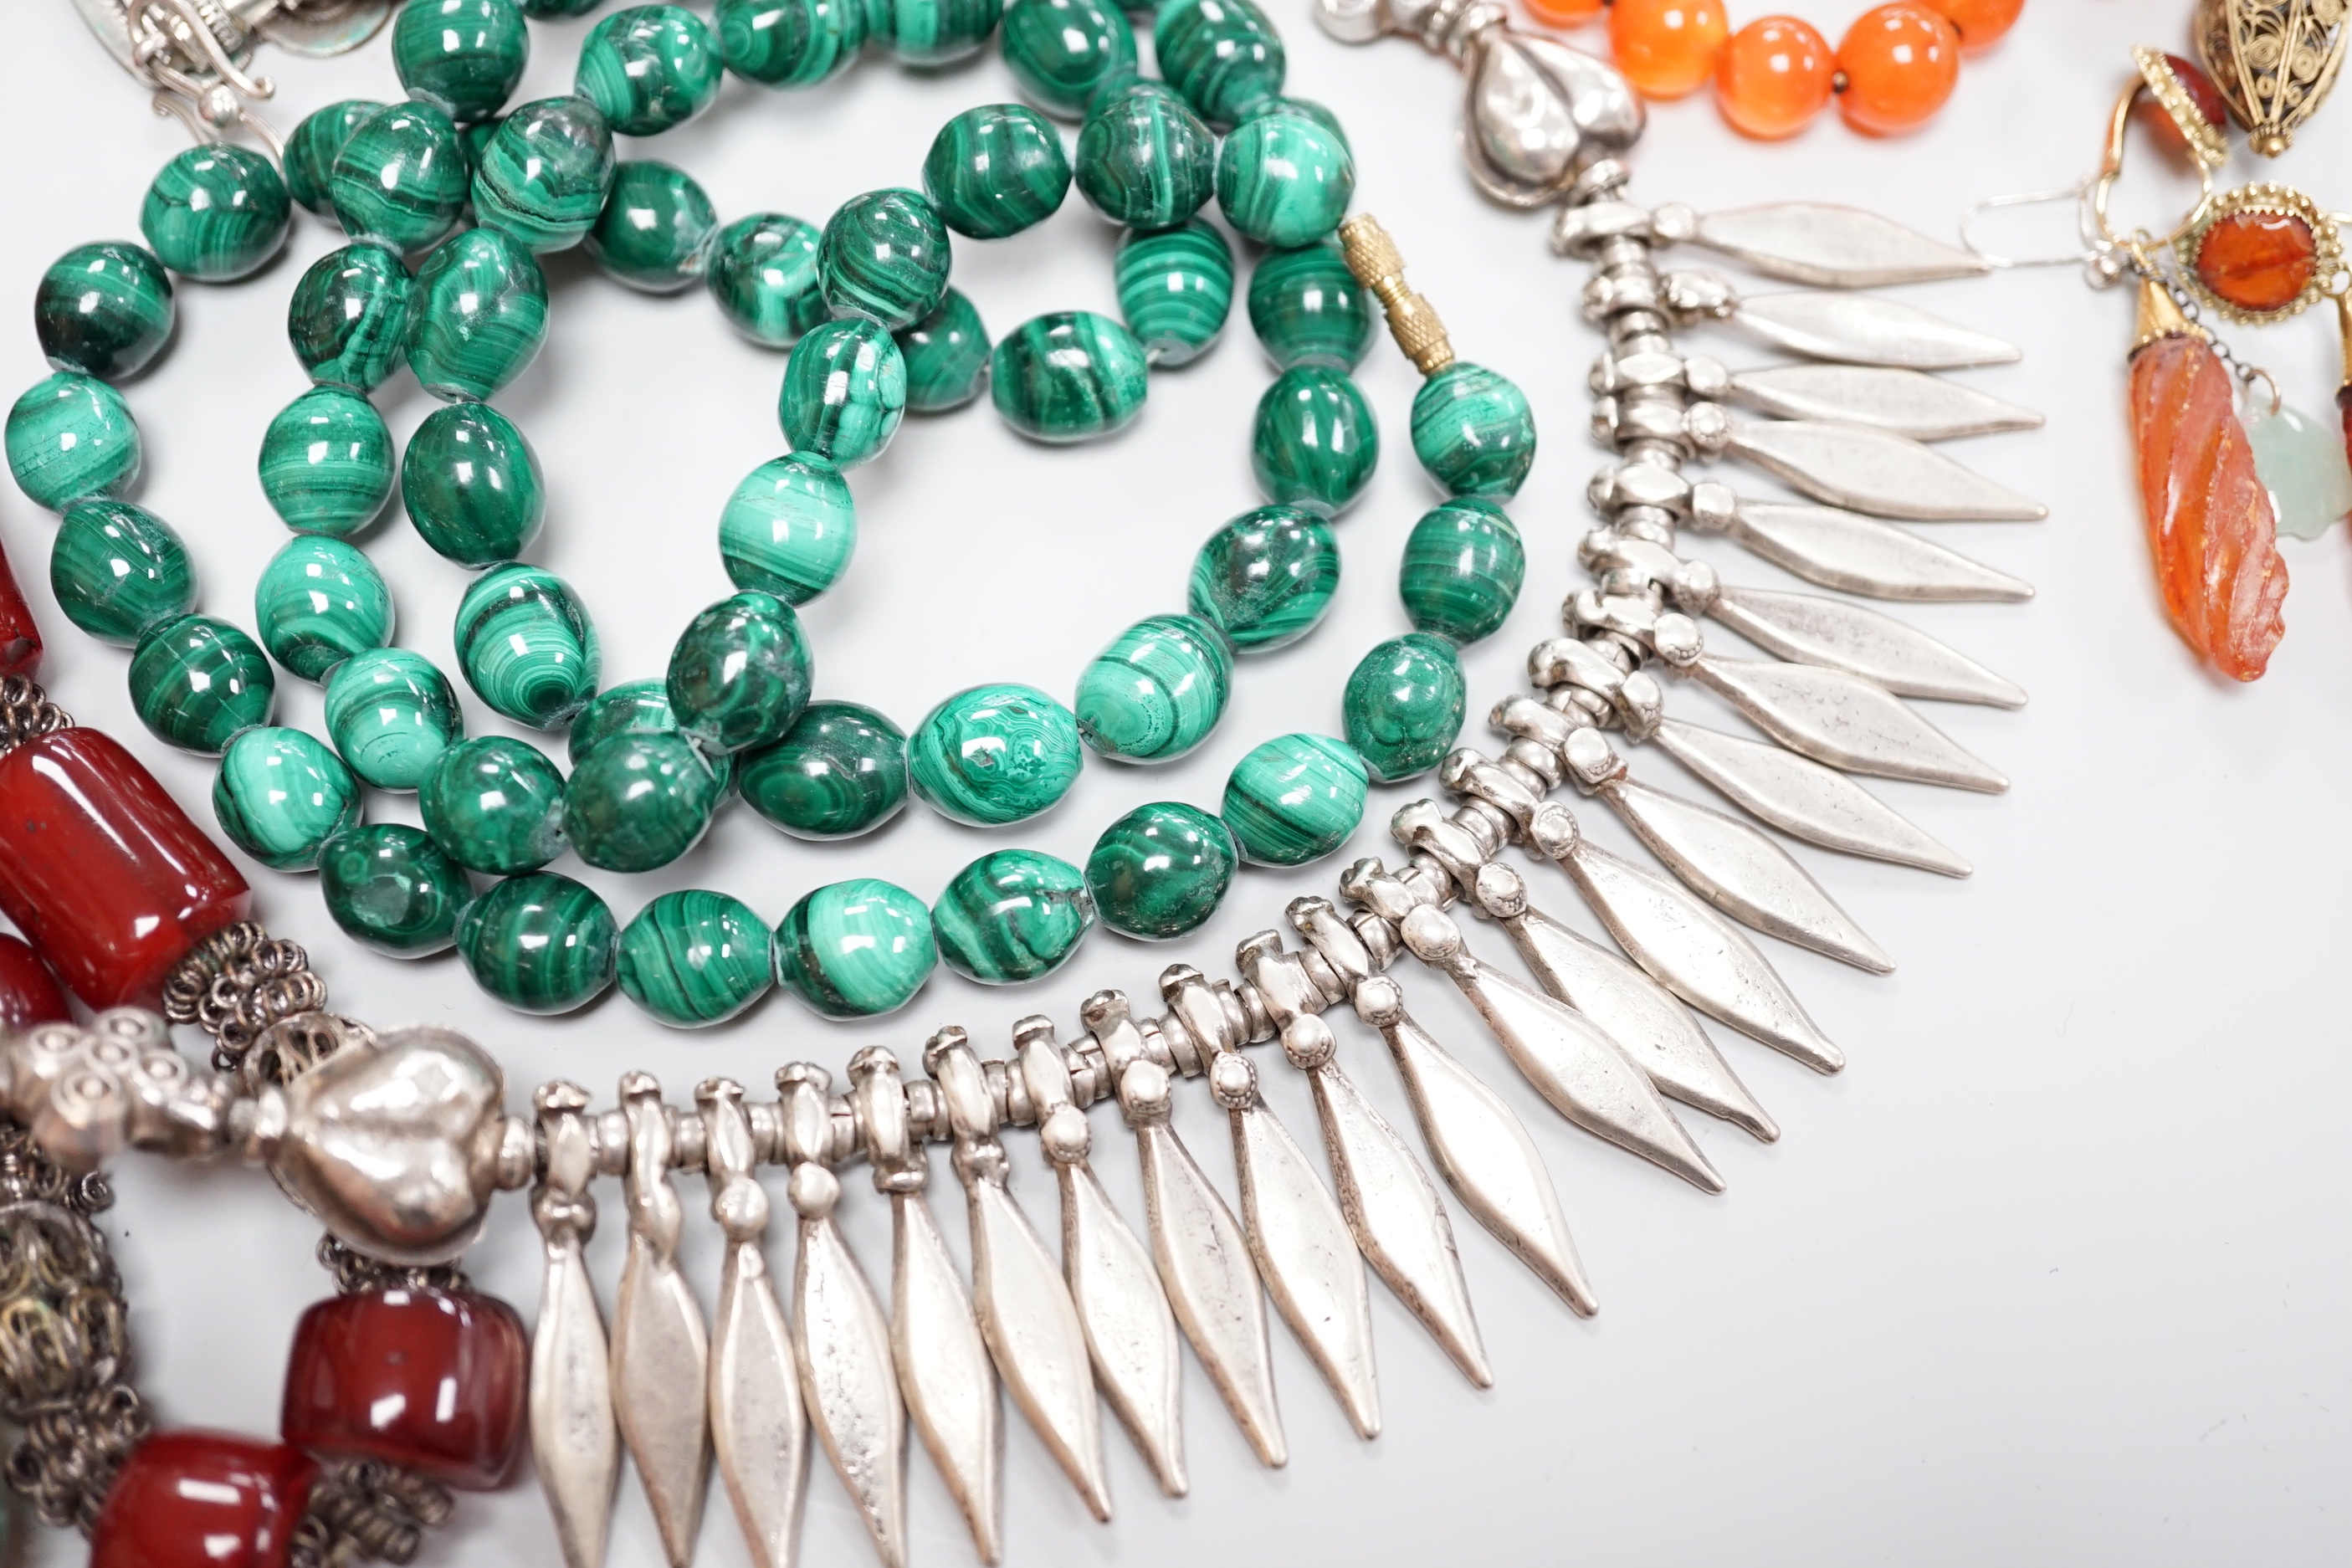 Assorted jewellery including a South American? white metal fringe necklace, a malachite bead necklace, amber earrings, filigree earrings, jet earrings, Hand Of Fatma pendant, agate bead necklace, hardstone pebble necklac